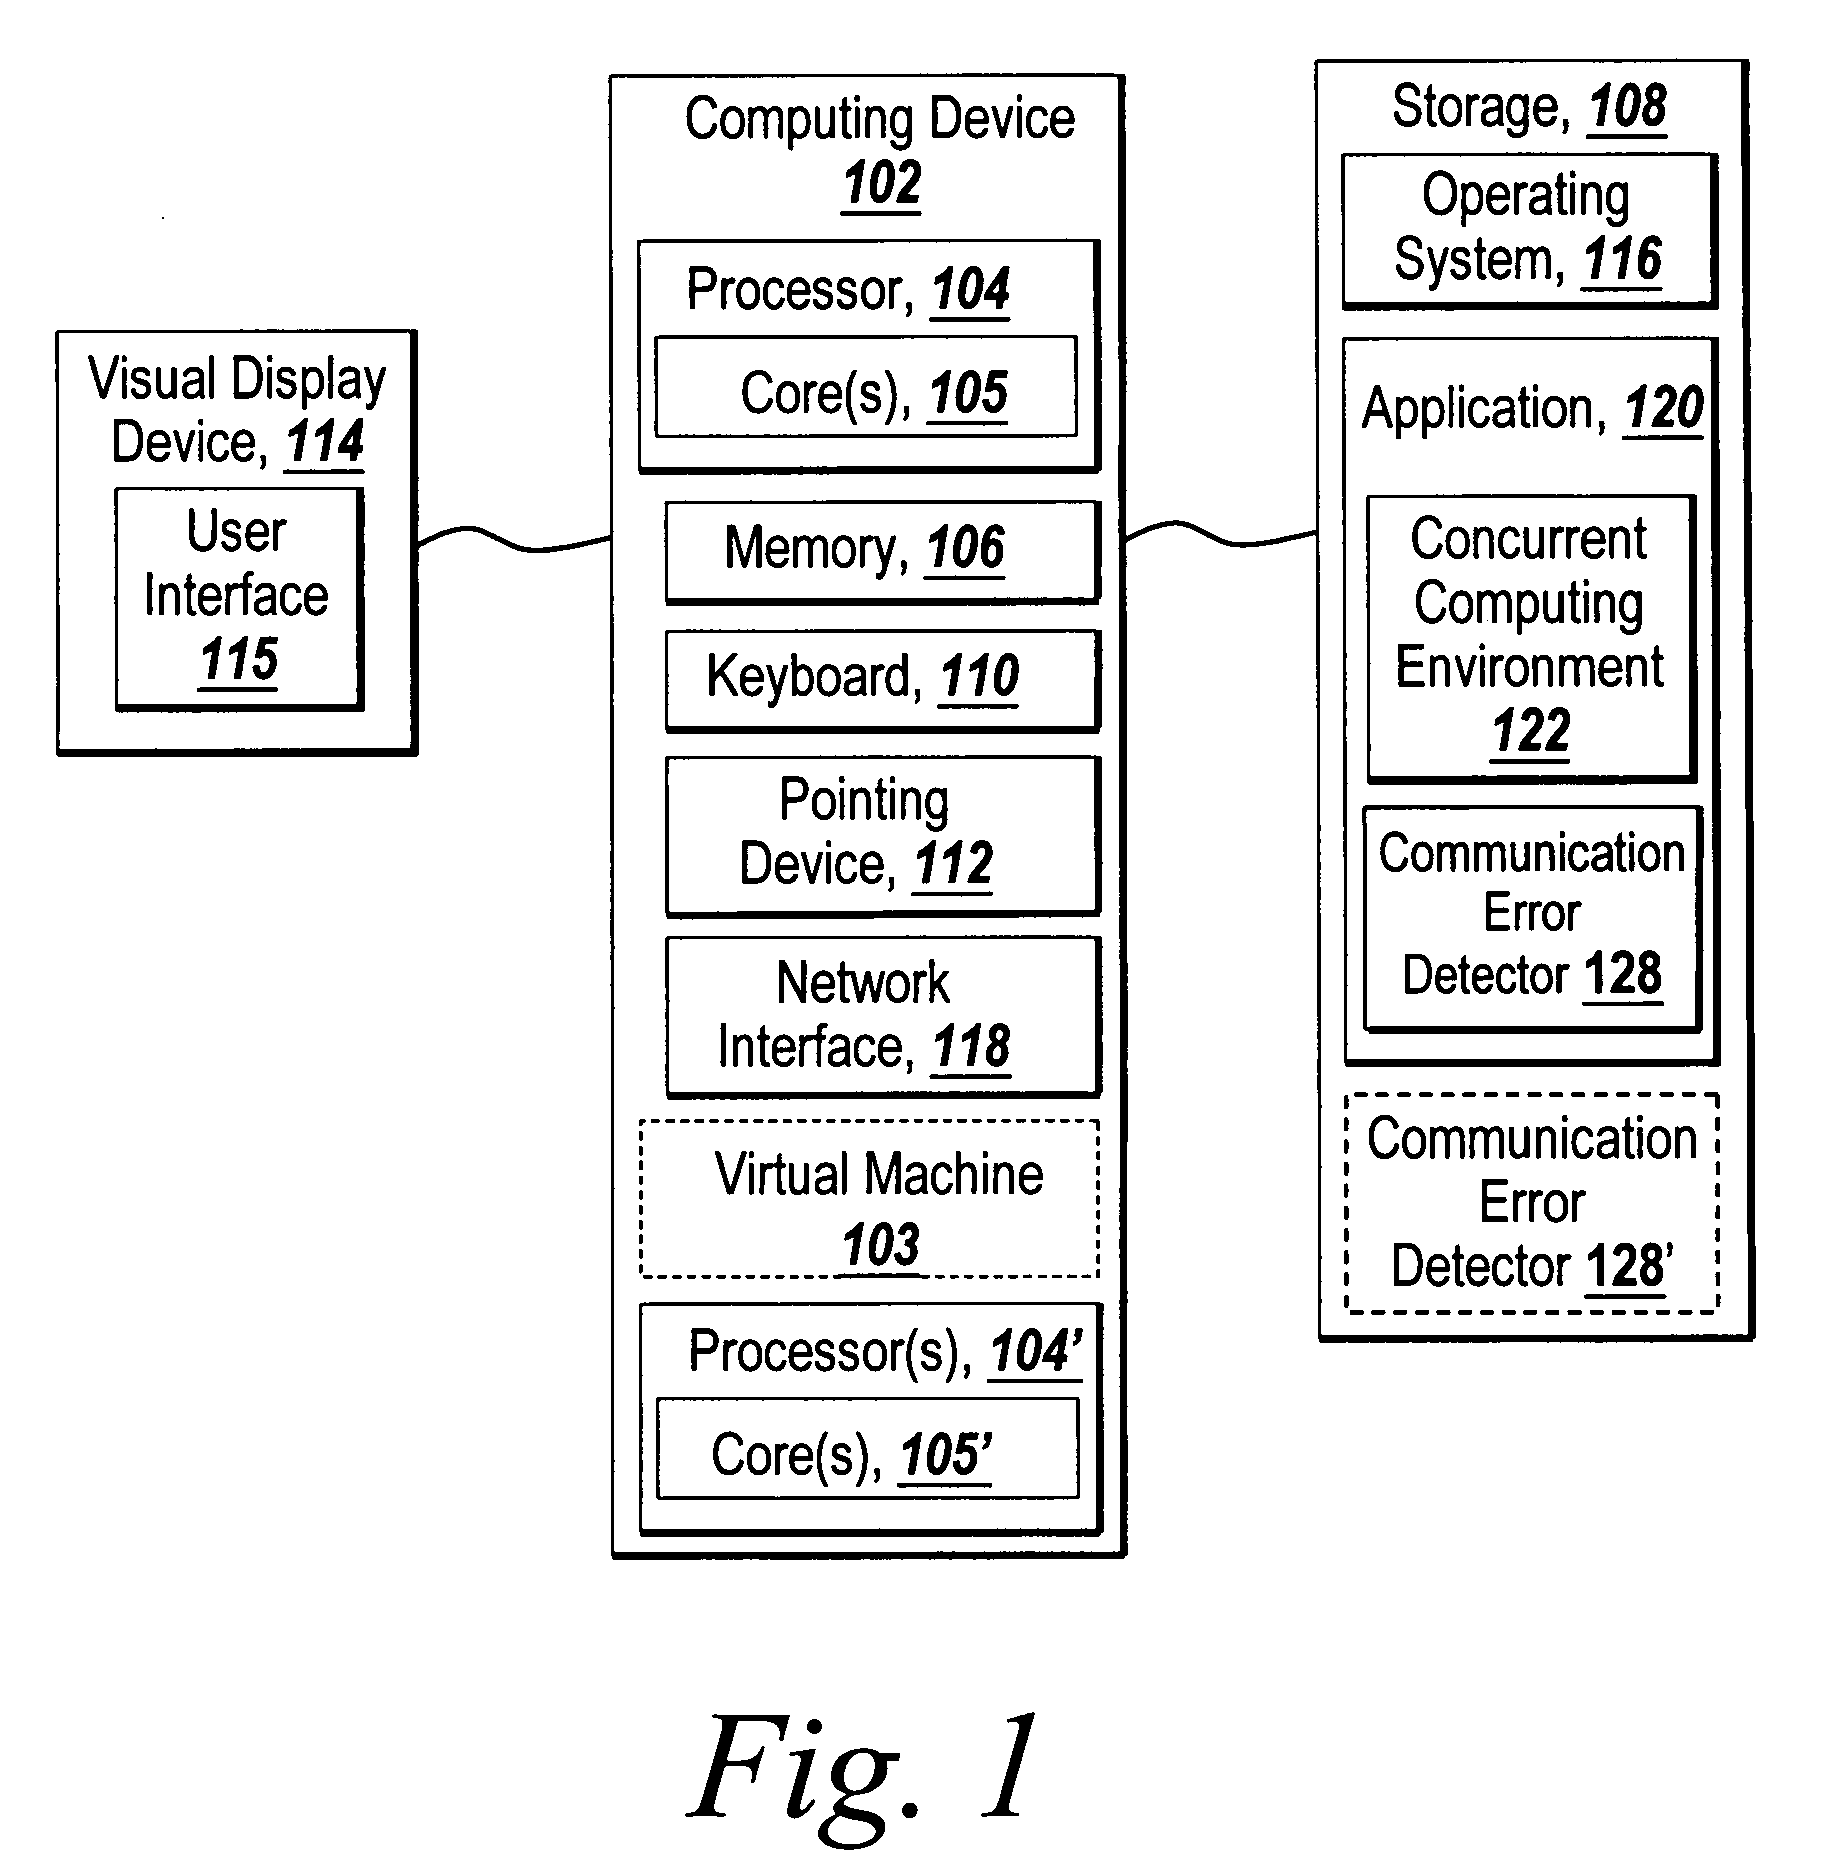 Recoverable error detection for concurrent computing programs